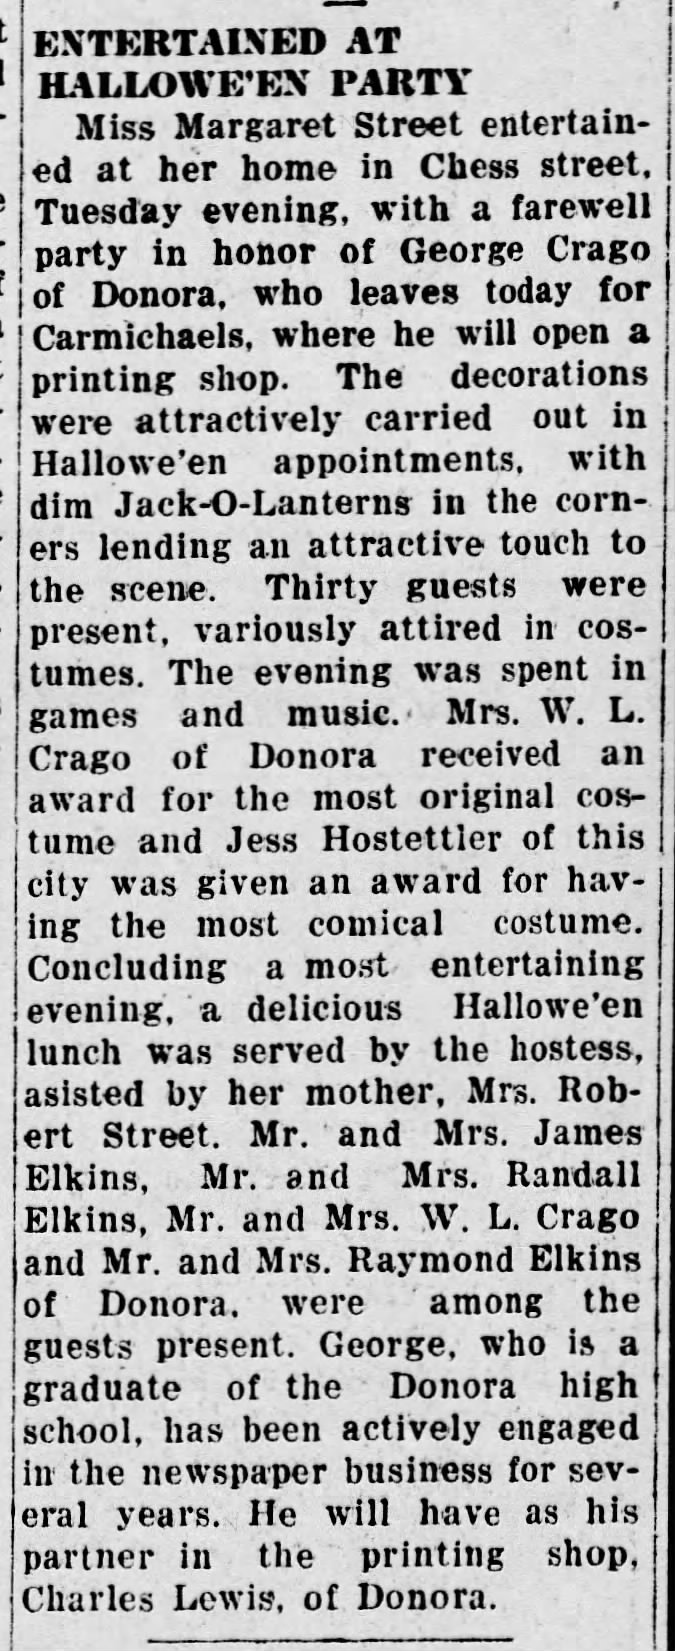 Margaret Street entertained party for George Crago, 2 Nov 1928